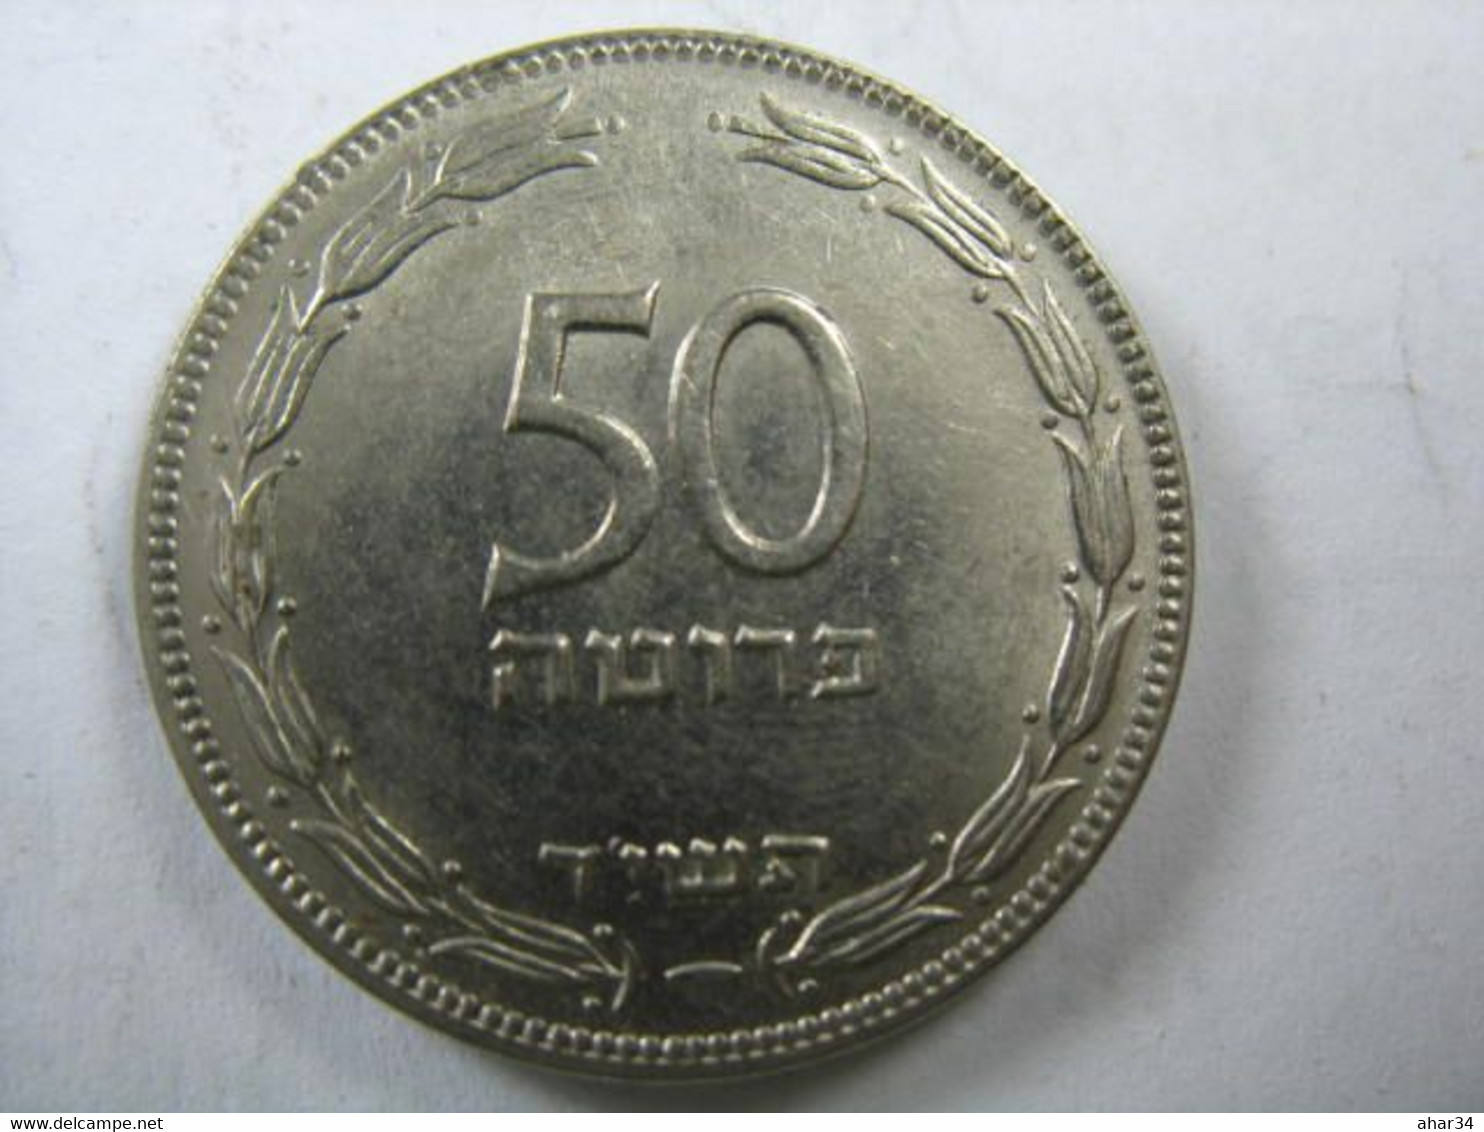 TEMPLATE LISTING ISRAEL  LOT OF  10 COINS 50 PRUTA   1954 UNC     COIN. - Other - Asia